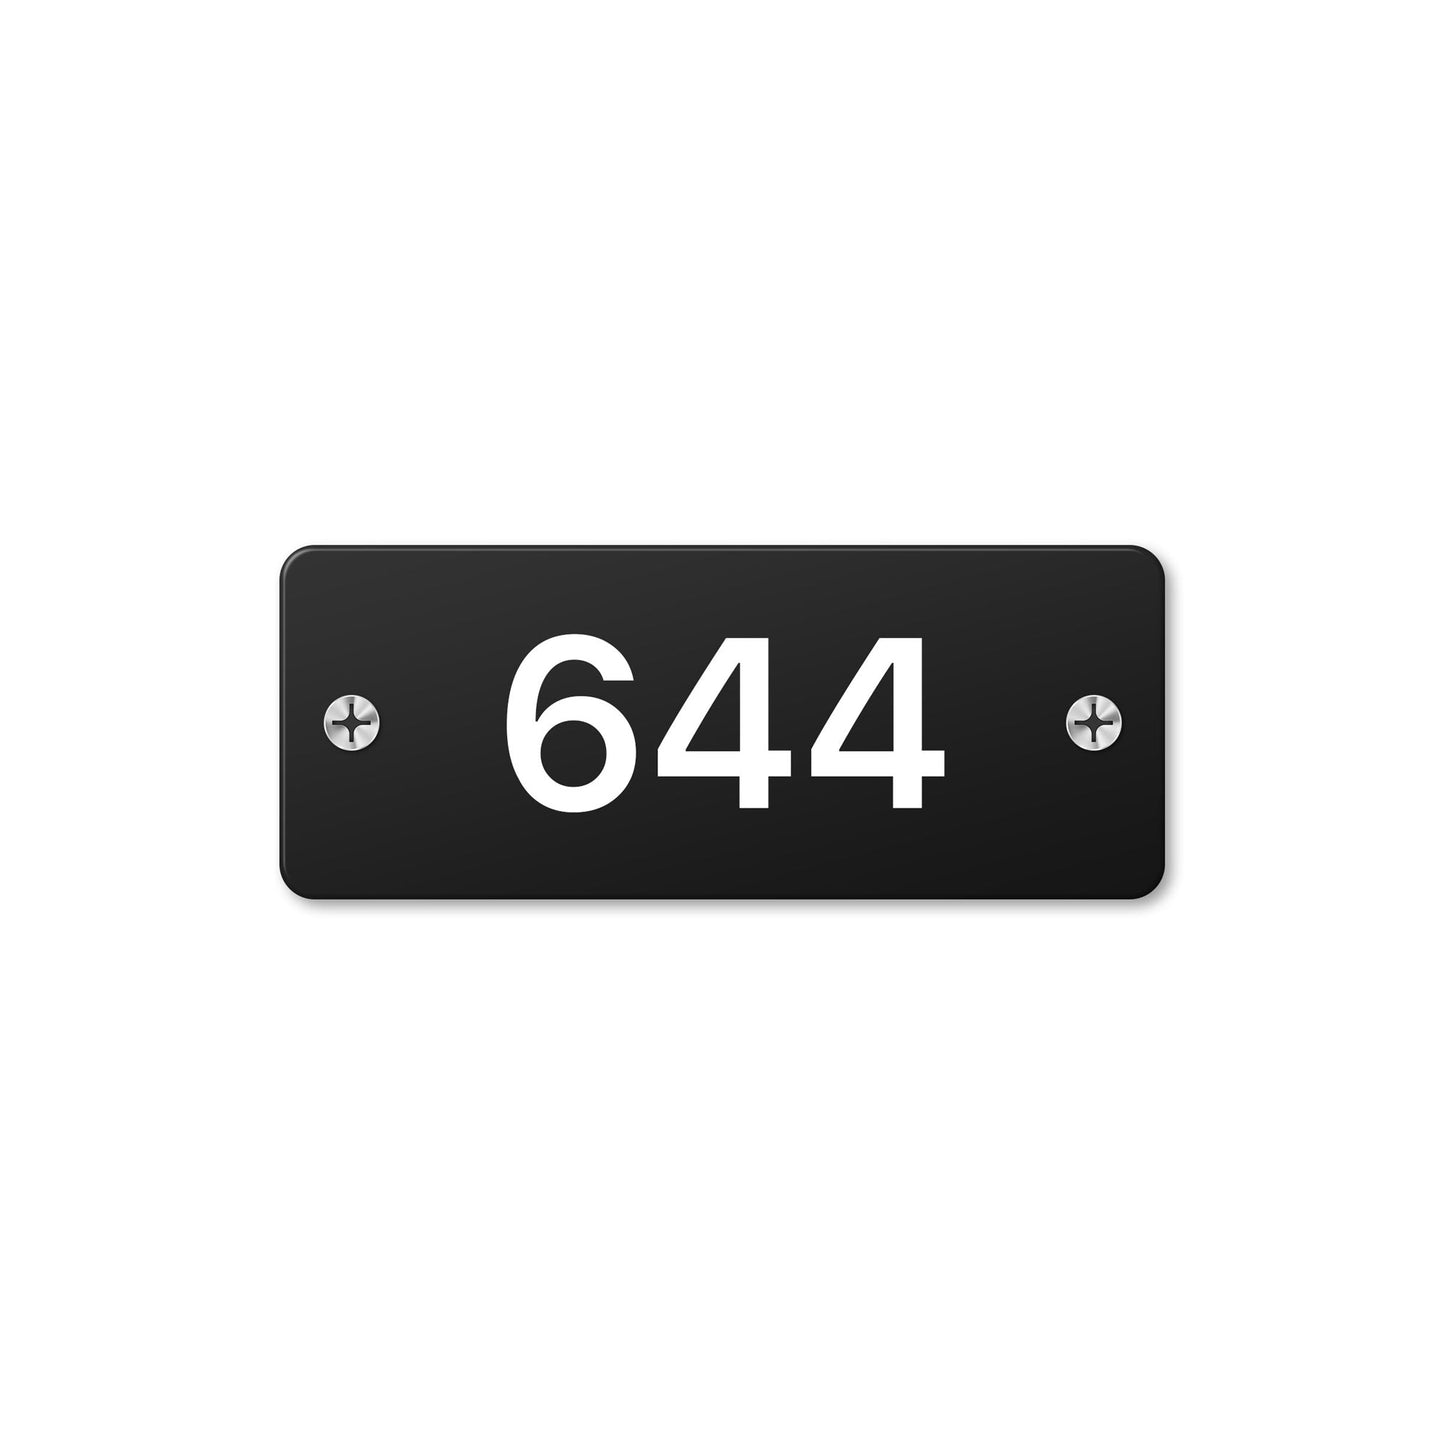 Numeral 644